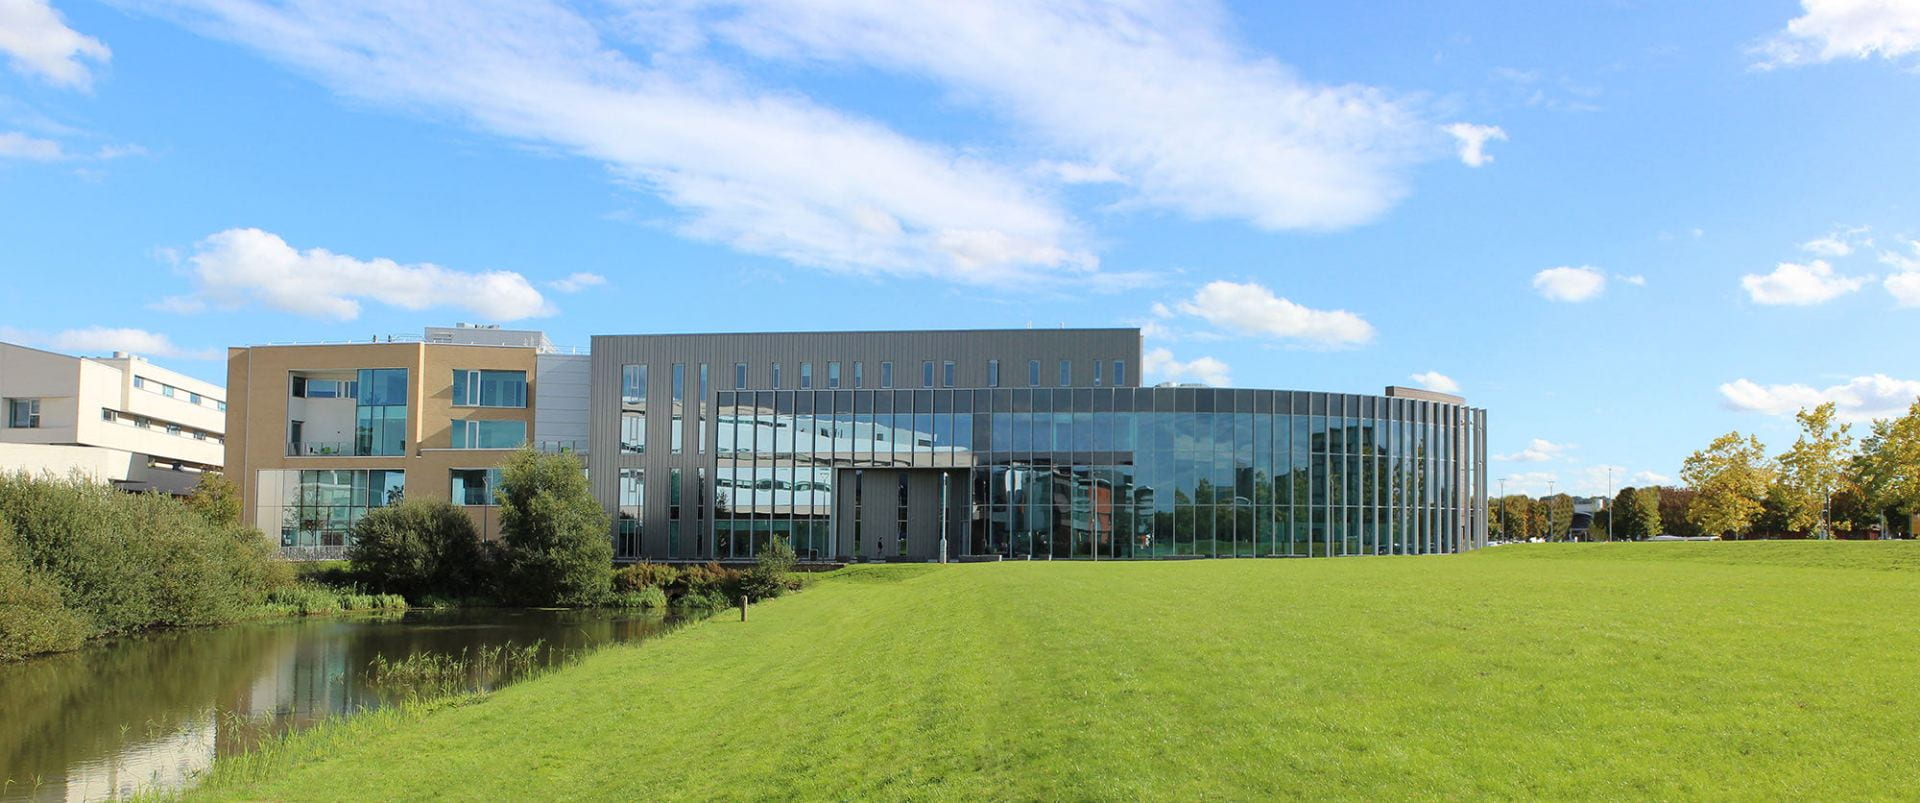 A panorama photo of the Isaac Newton Building at the University of Lincoln.